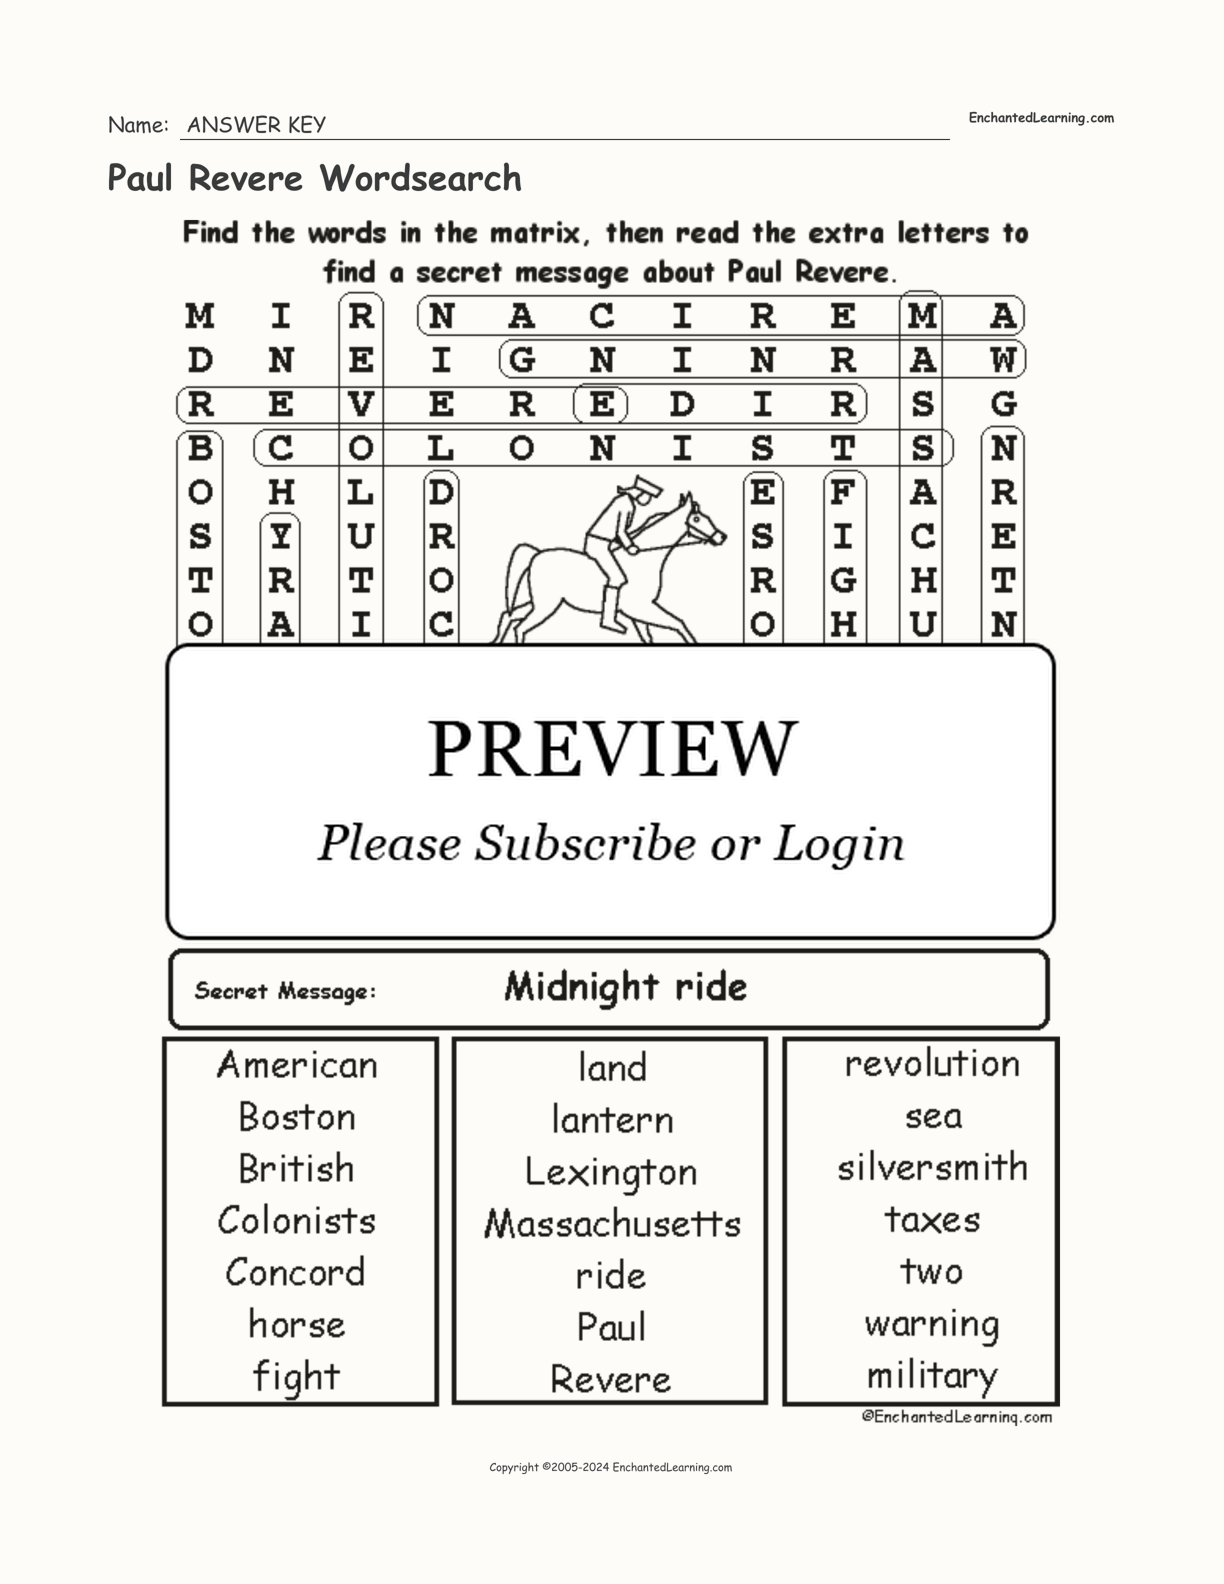 Paul Revere Wordsearch interactive worksheet page 2